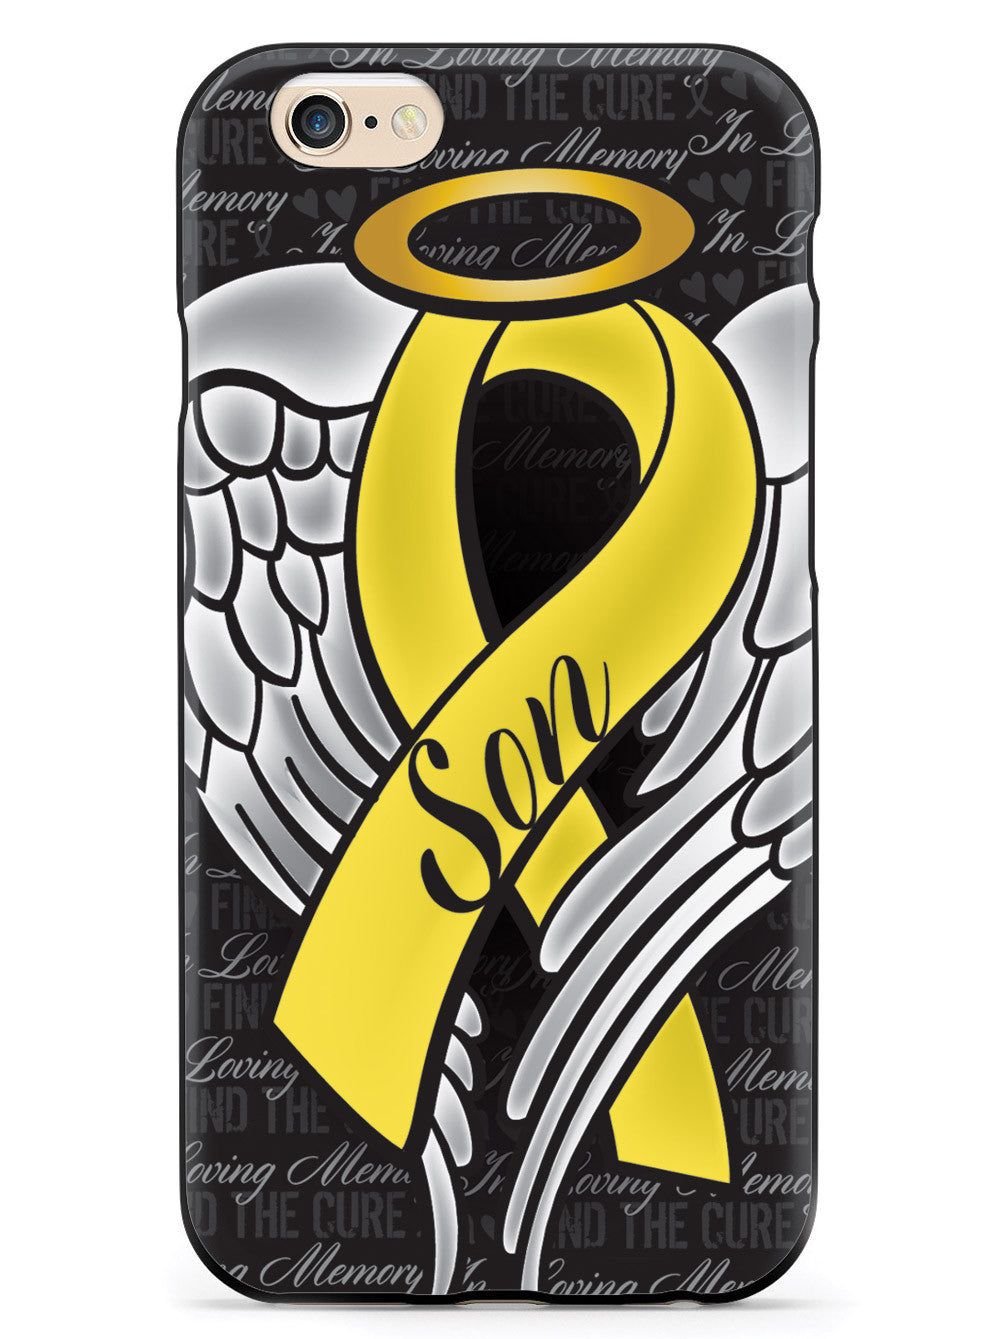 In Loving Memory of My Son - Yellow Ribbon Case